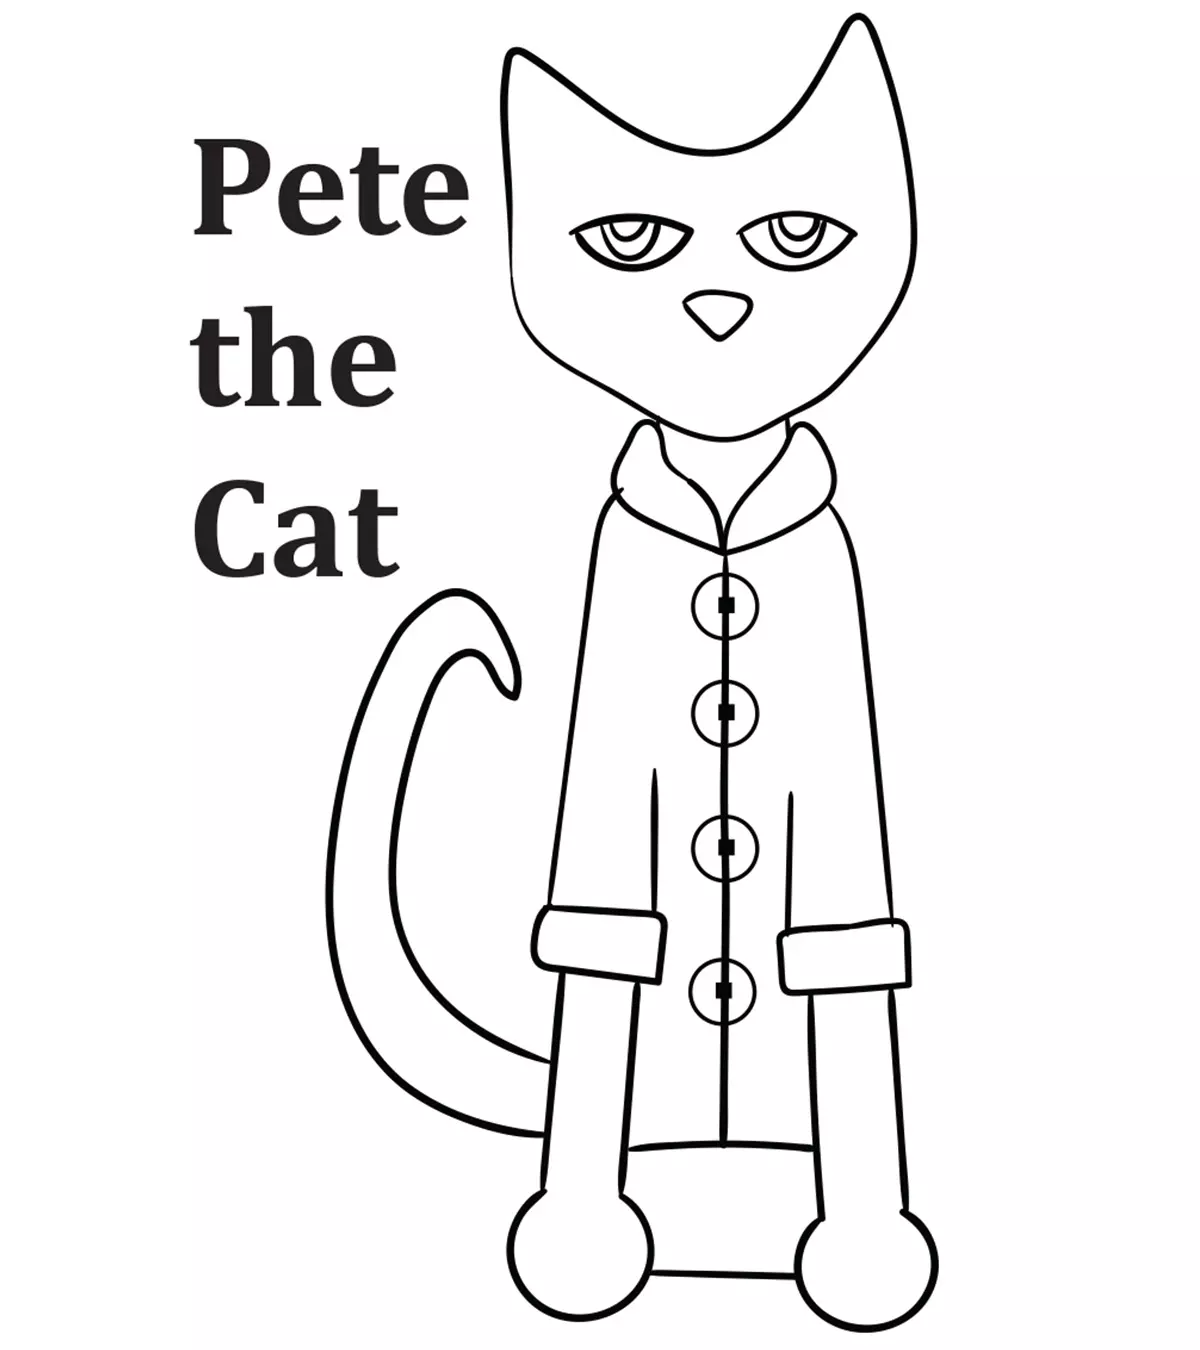 21 Best ‘Pete The Cat’ Coloring Pages For Your Little Ones